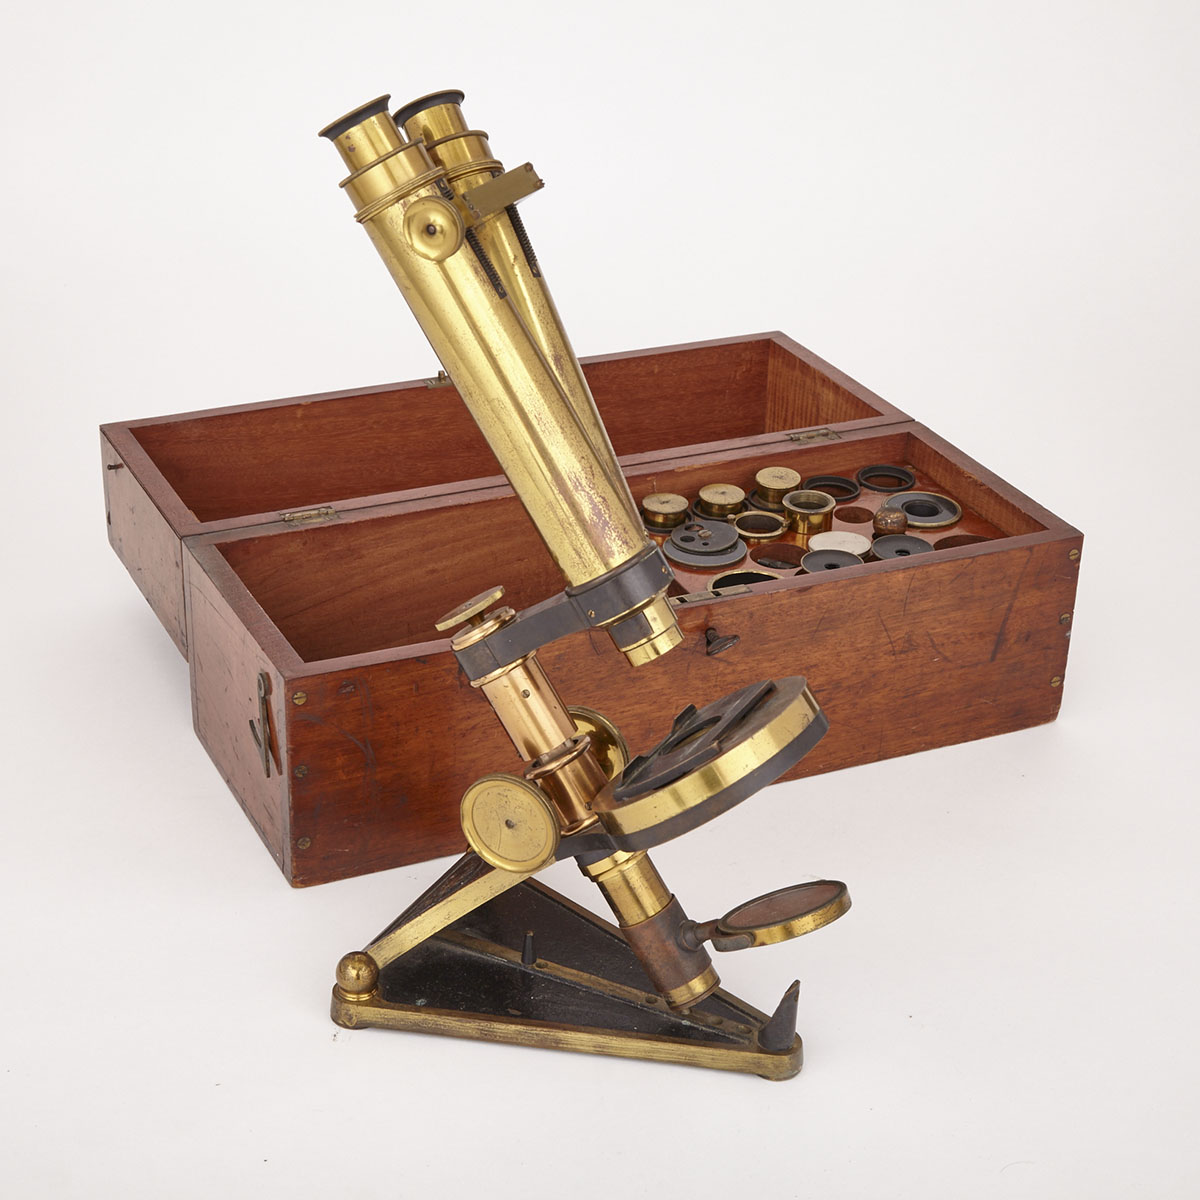 Victorian Lacquered and Enamelled Brass Binocular Collapsing Microscope, R & J Beck, London, 19th century